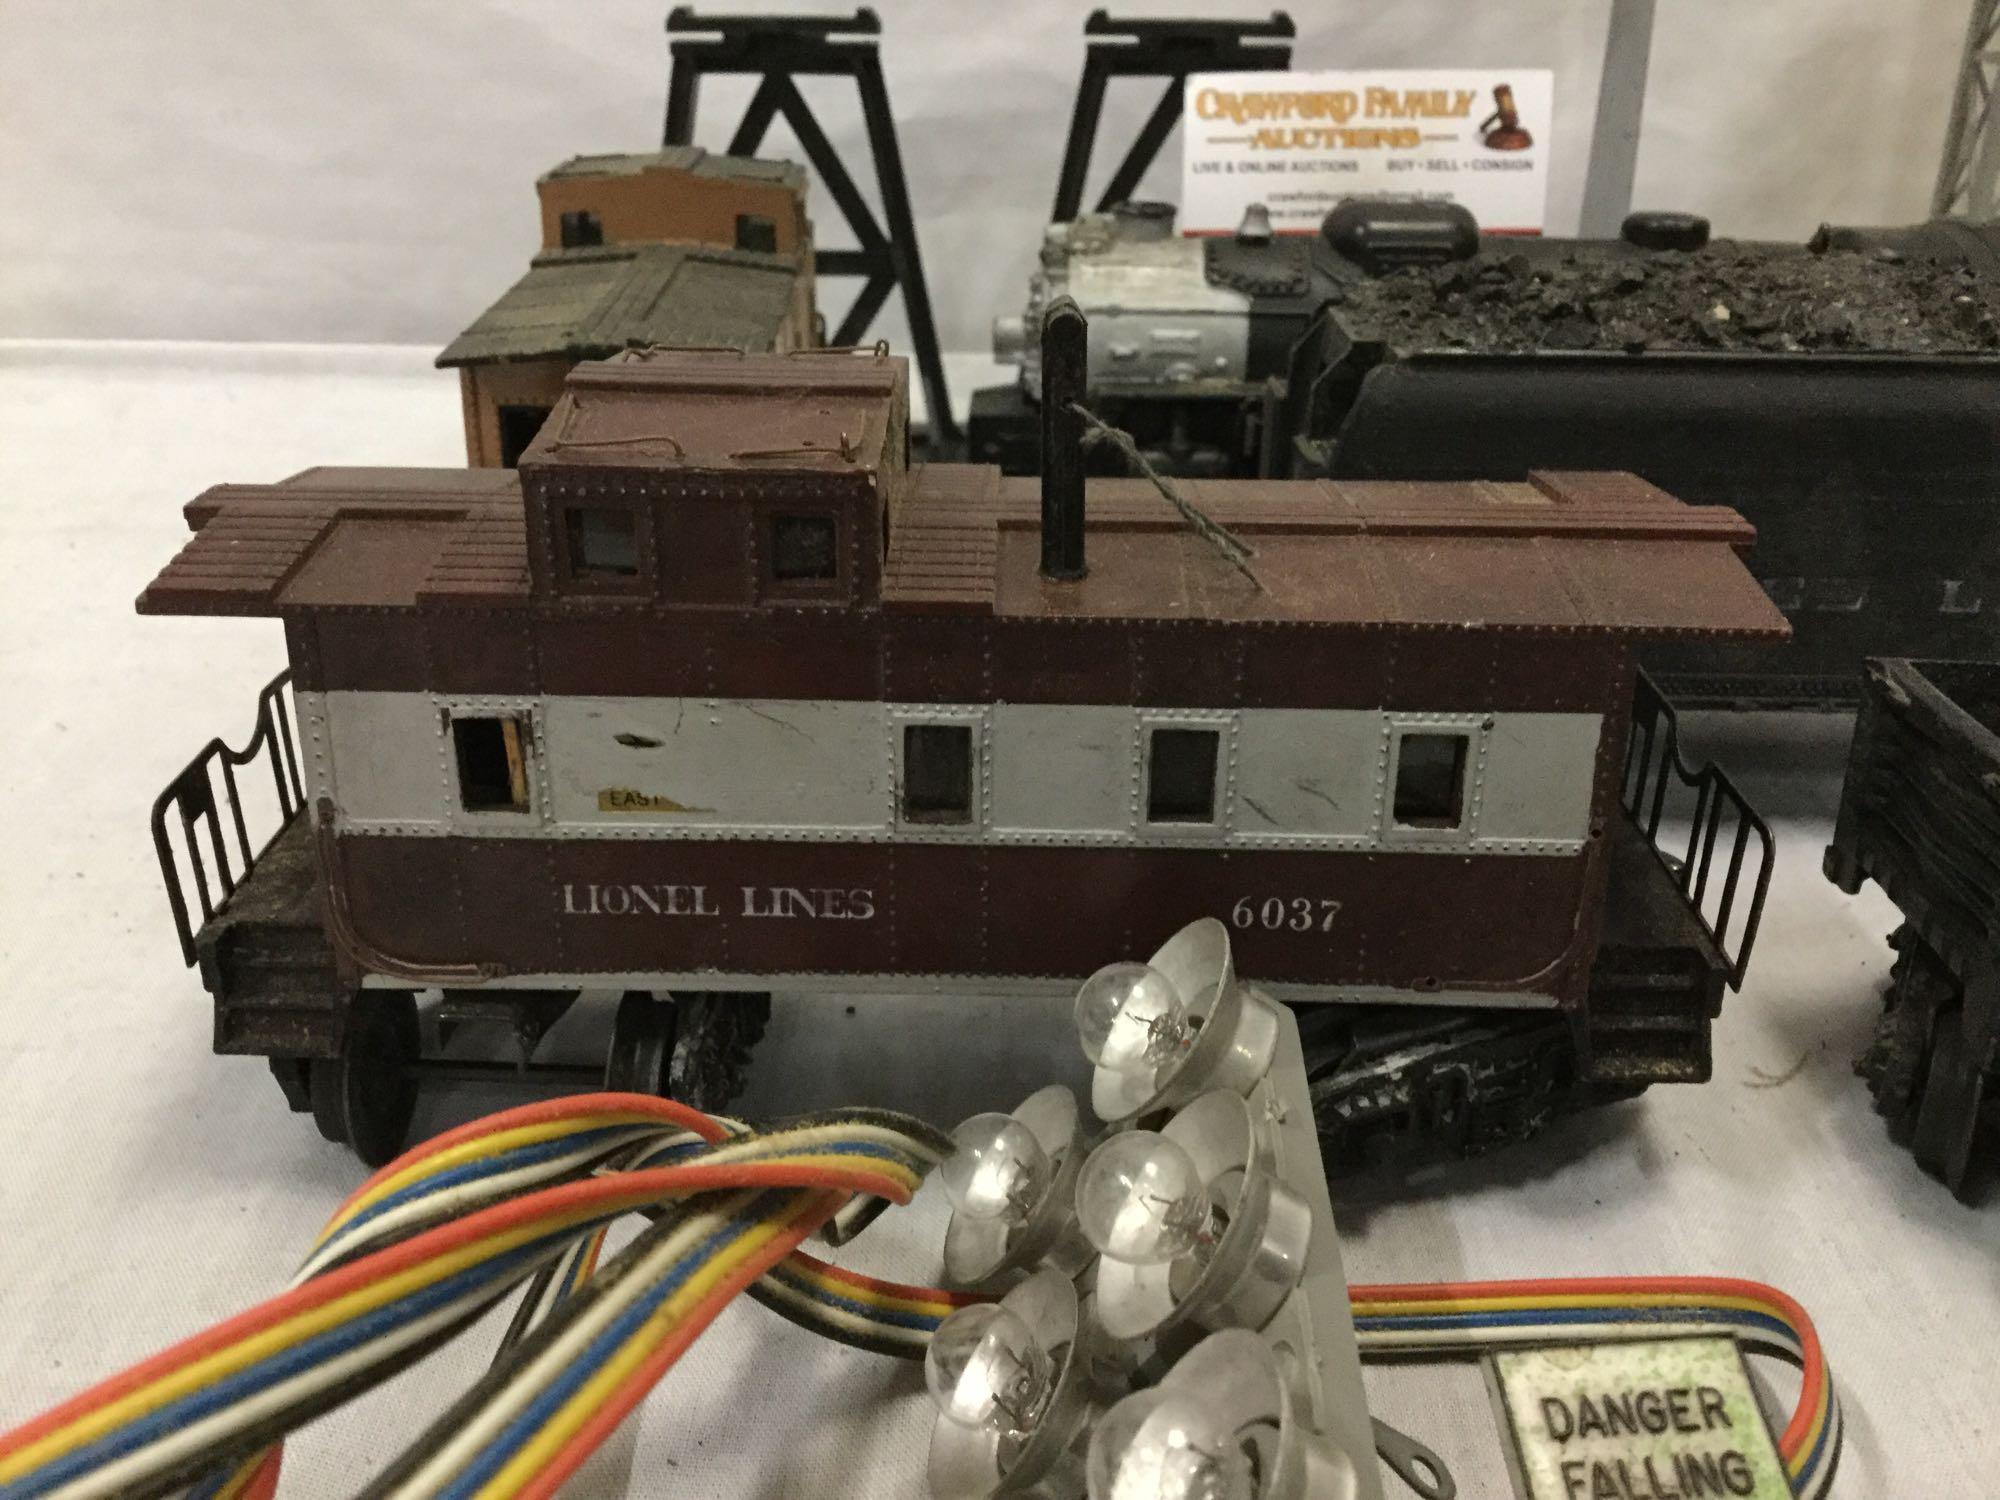 Vintage Lionel 2026 027 o27 Locomotive train car and collection of model trains / diorama set pieces